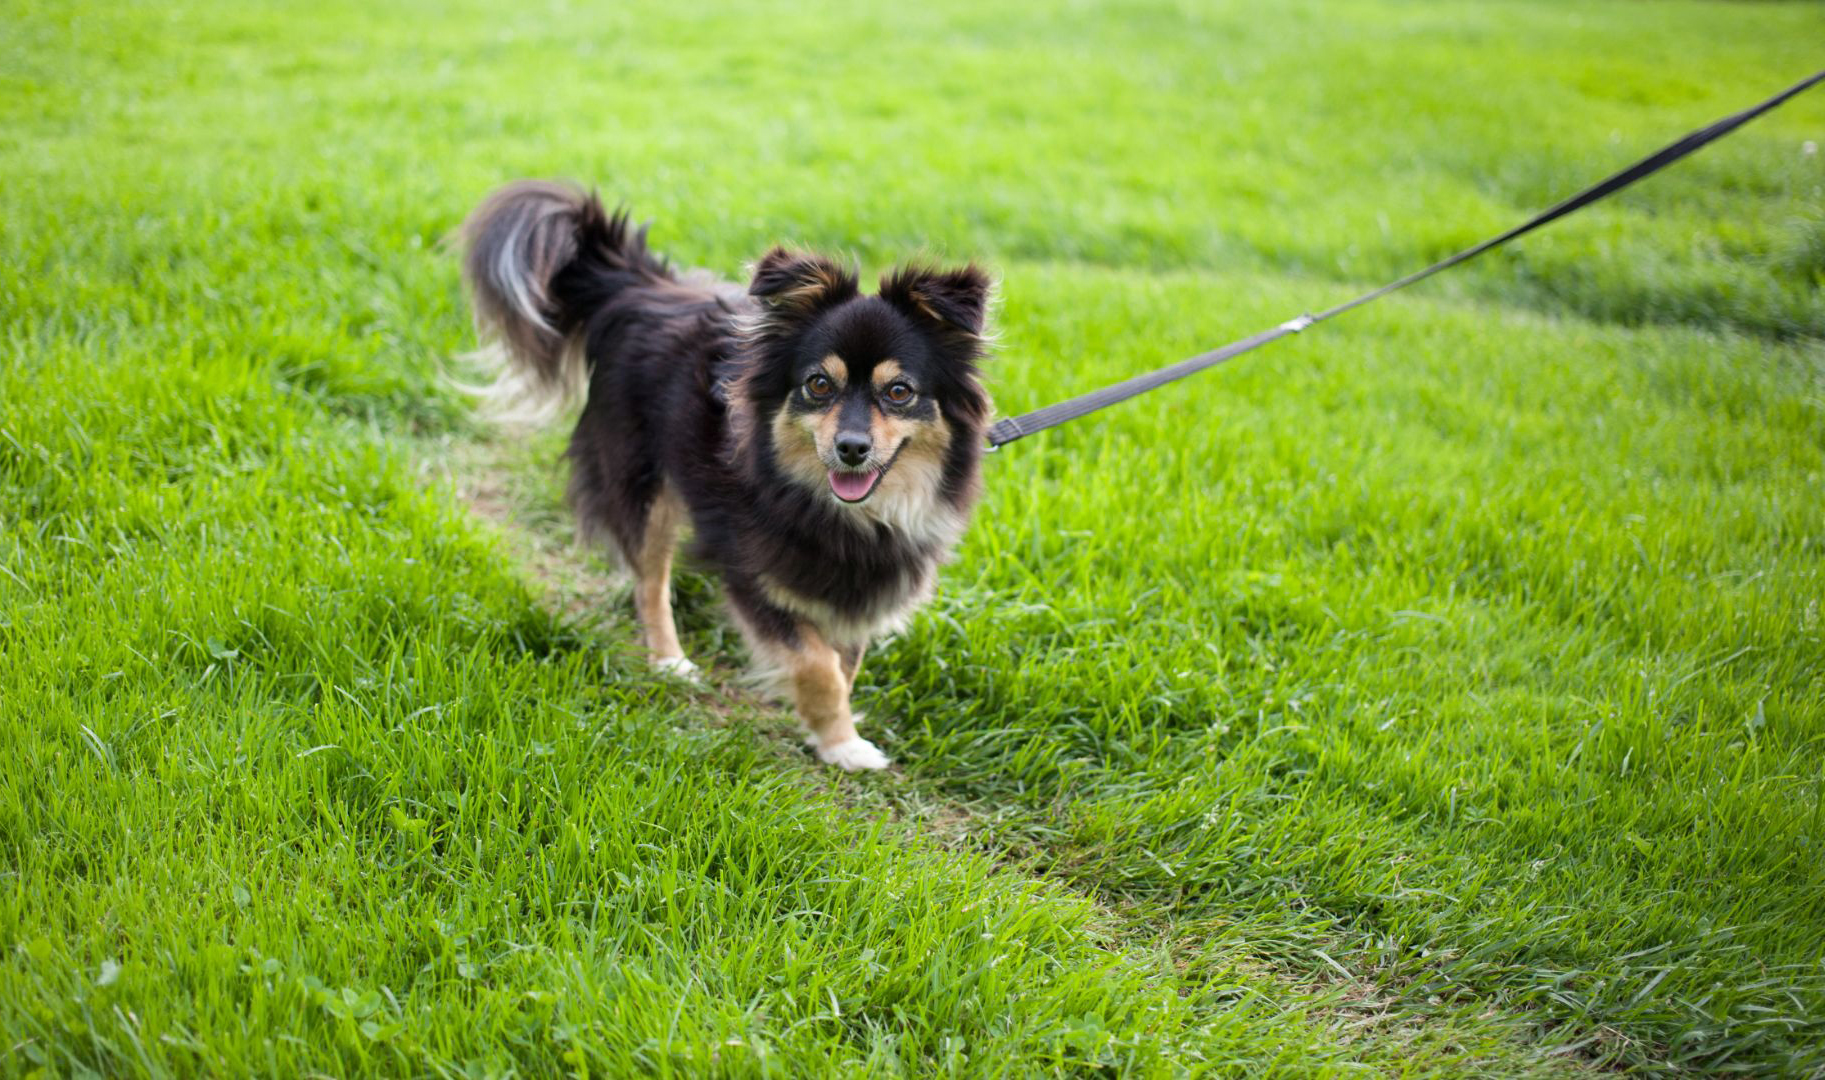 Places to go: Inclusive Parks for Pets in Hong Kong 2022